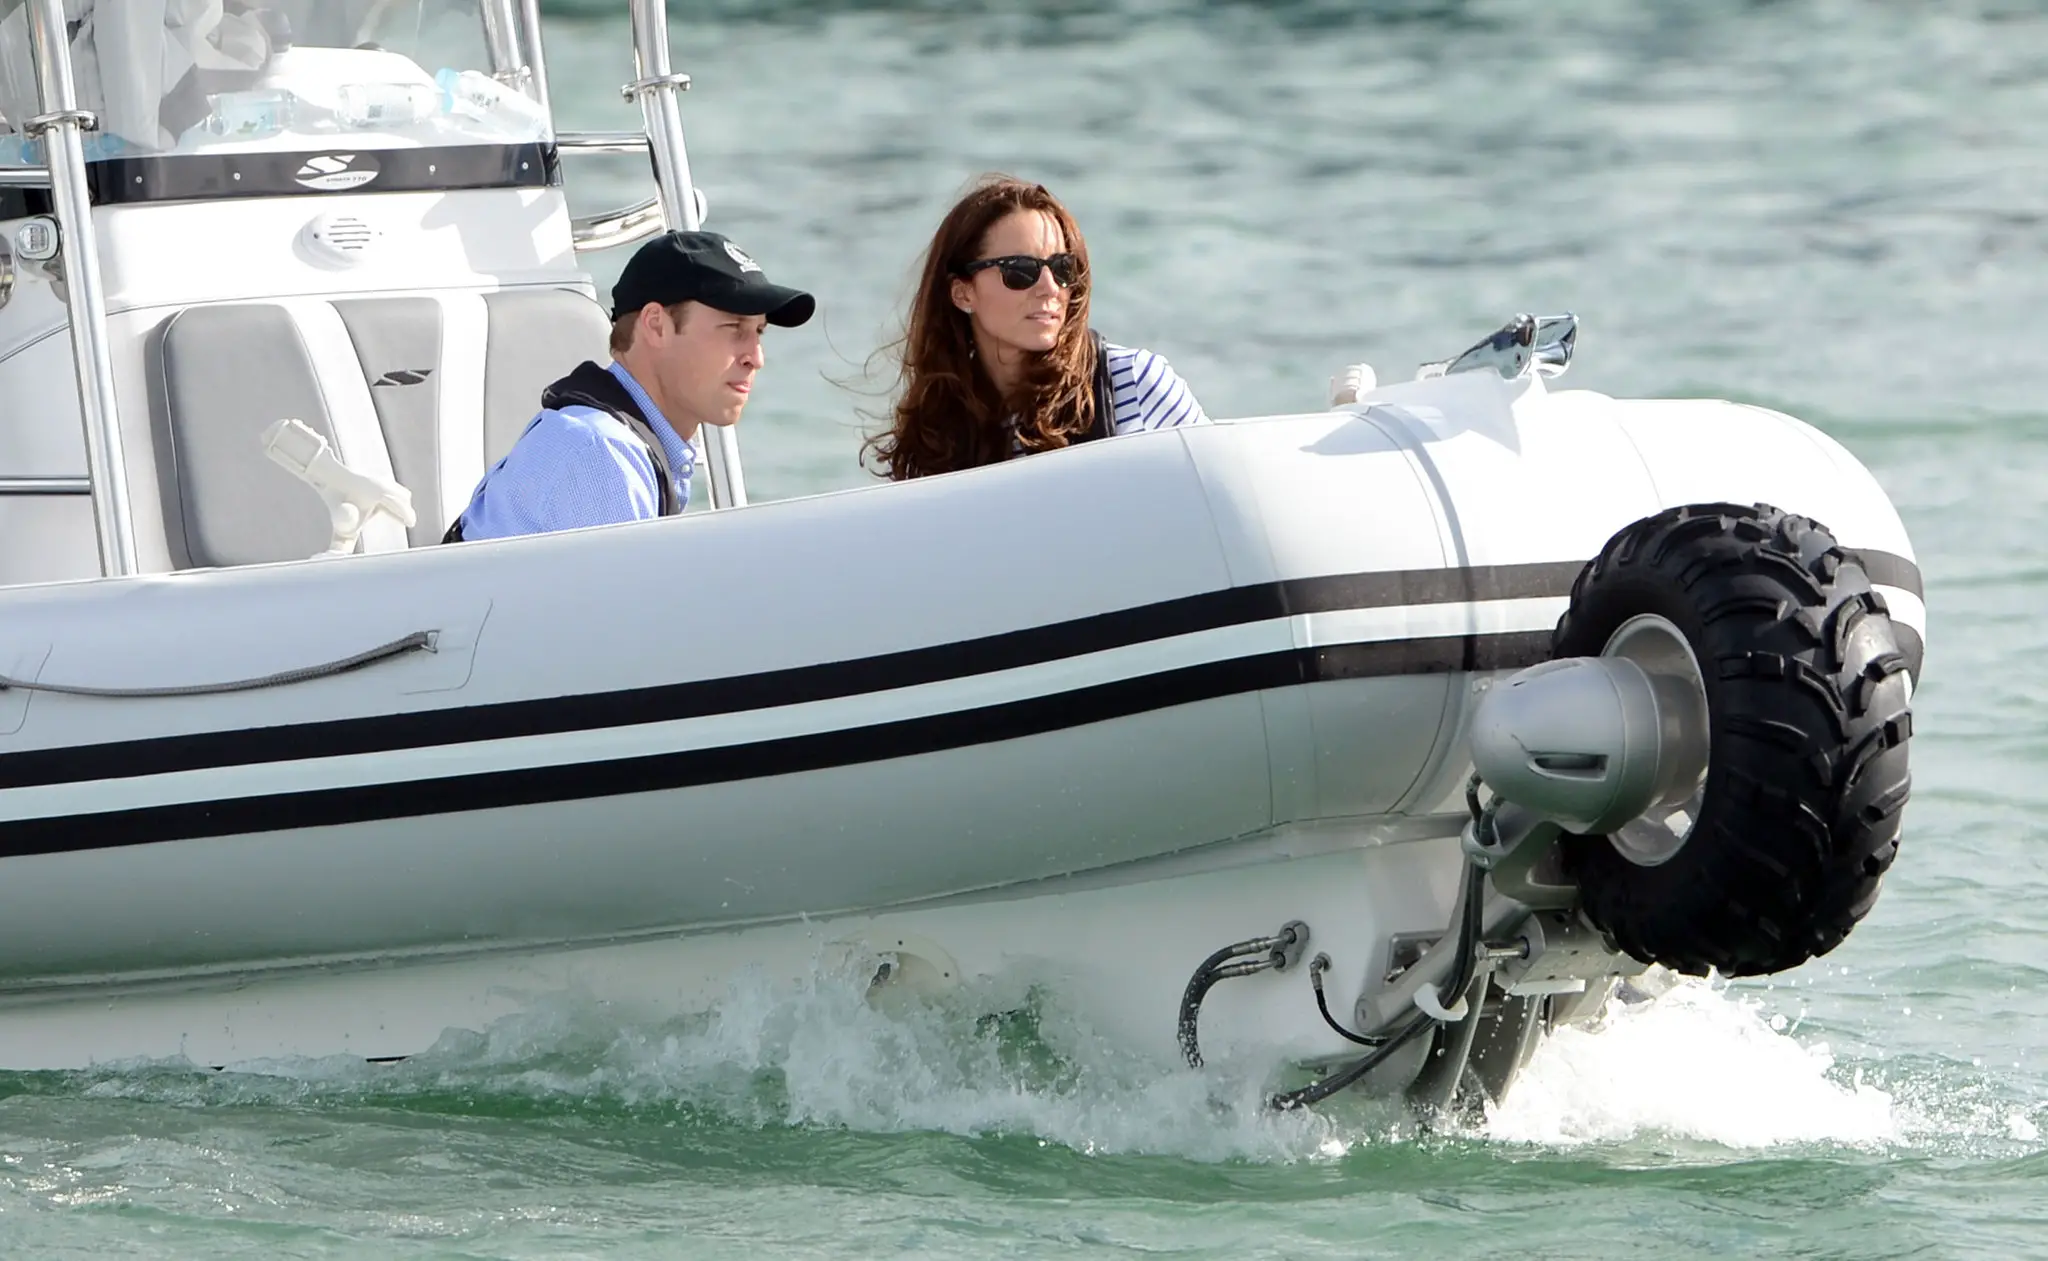 The Duke and Duchess of Cambridge during New Zealand tour in 2014